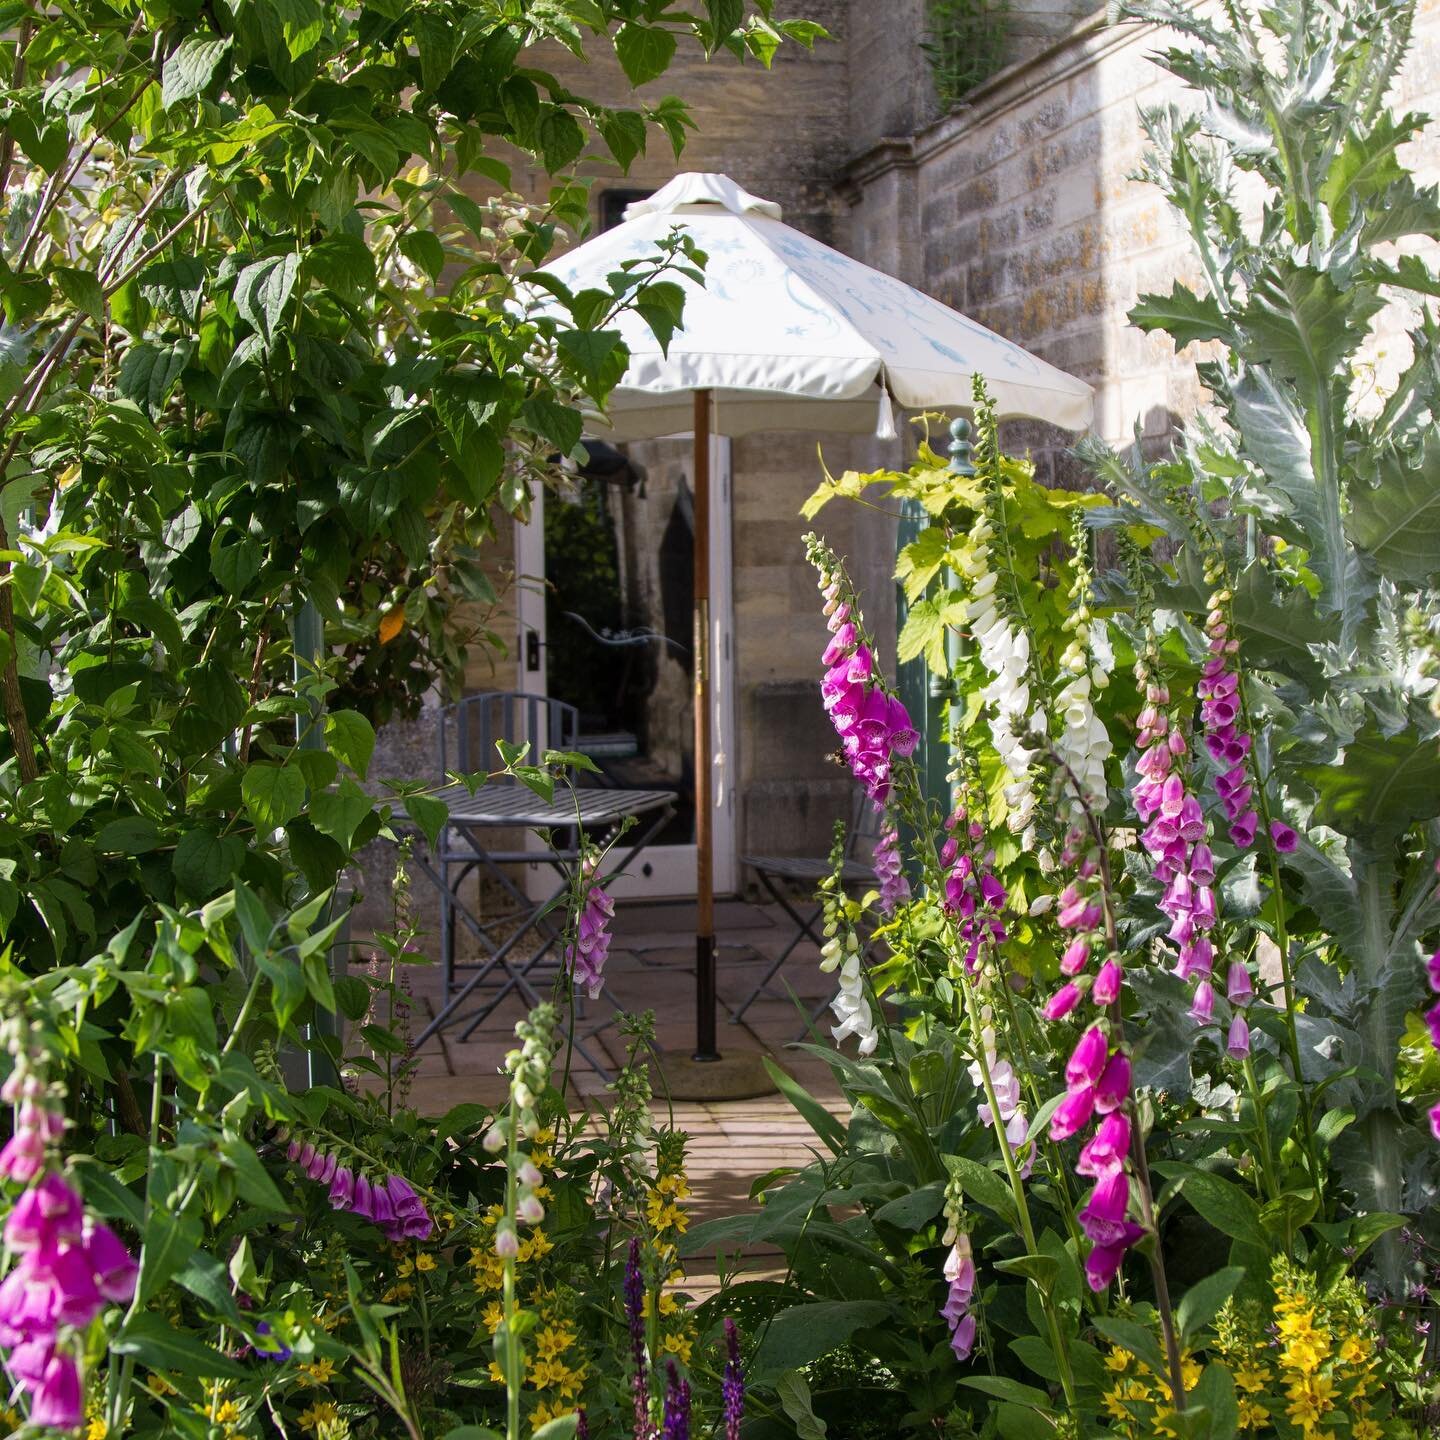 Taking tea on your own private terrace, wandering out into the gardens for a walk with wine - relaxing, reading, roaming at your leisure.
Staying in Easton Walled Gardens, from The Gatehouse Lodge to the Garden Lofts, means staying in a different pla